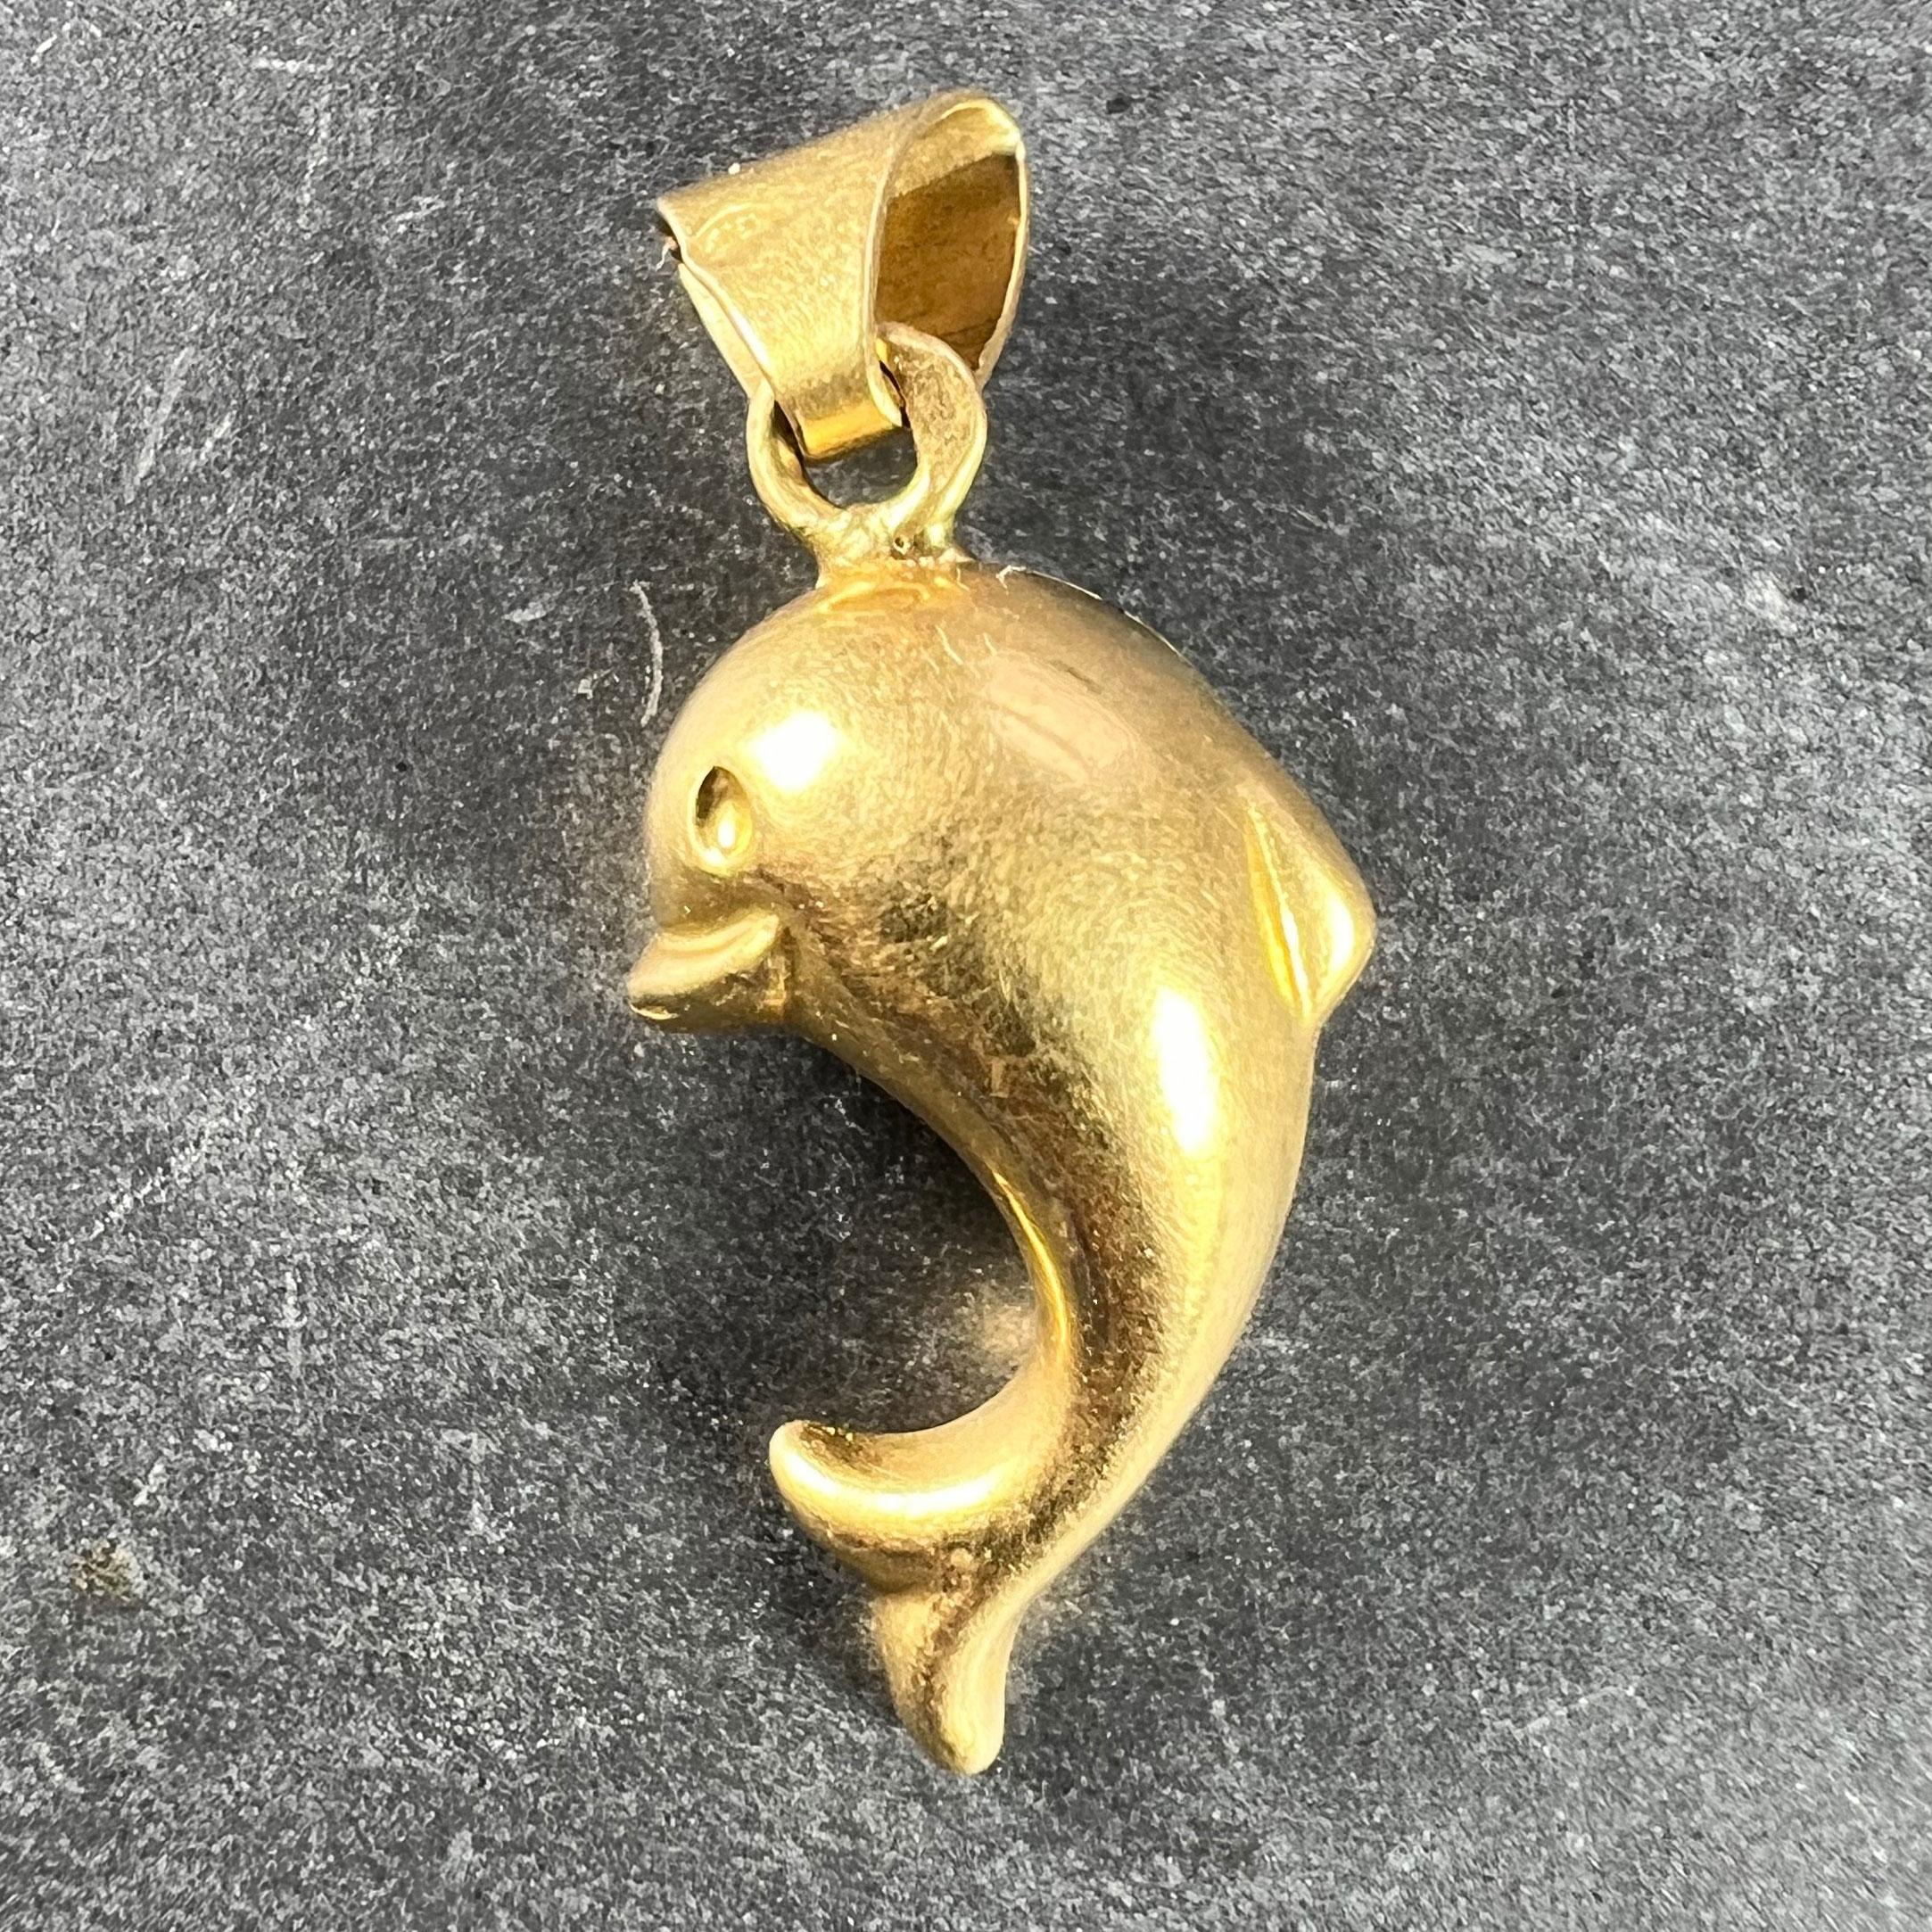 A French 18 karat (18K) yellow gold charm pendant designed as a leaping dolphin. Stamped with the eagle’s head for French manufacture and 18 karat gold.

Dimensions: 1.9 x 1 x 0.75 cm (not including jump ring)
Weight: 0.82 grams
(Chain not included.)